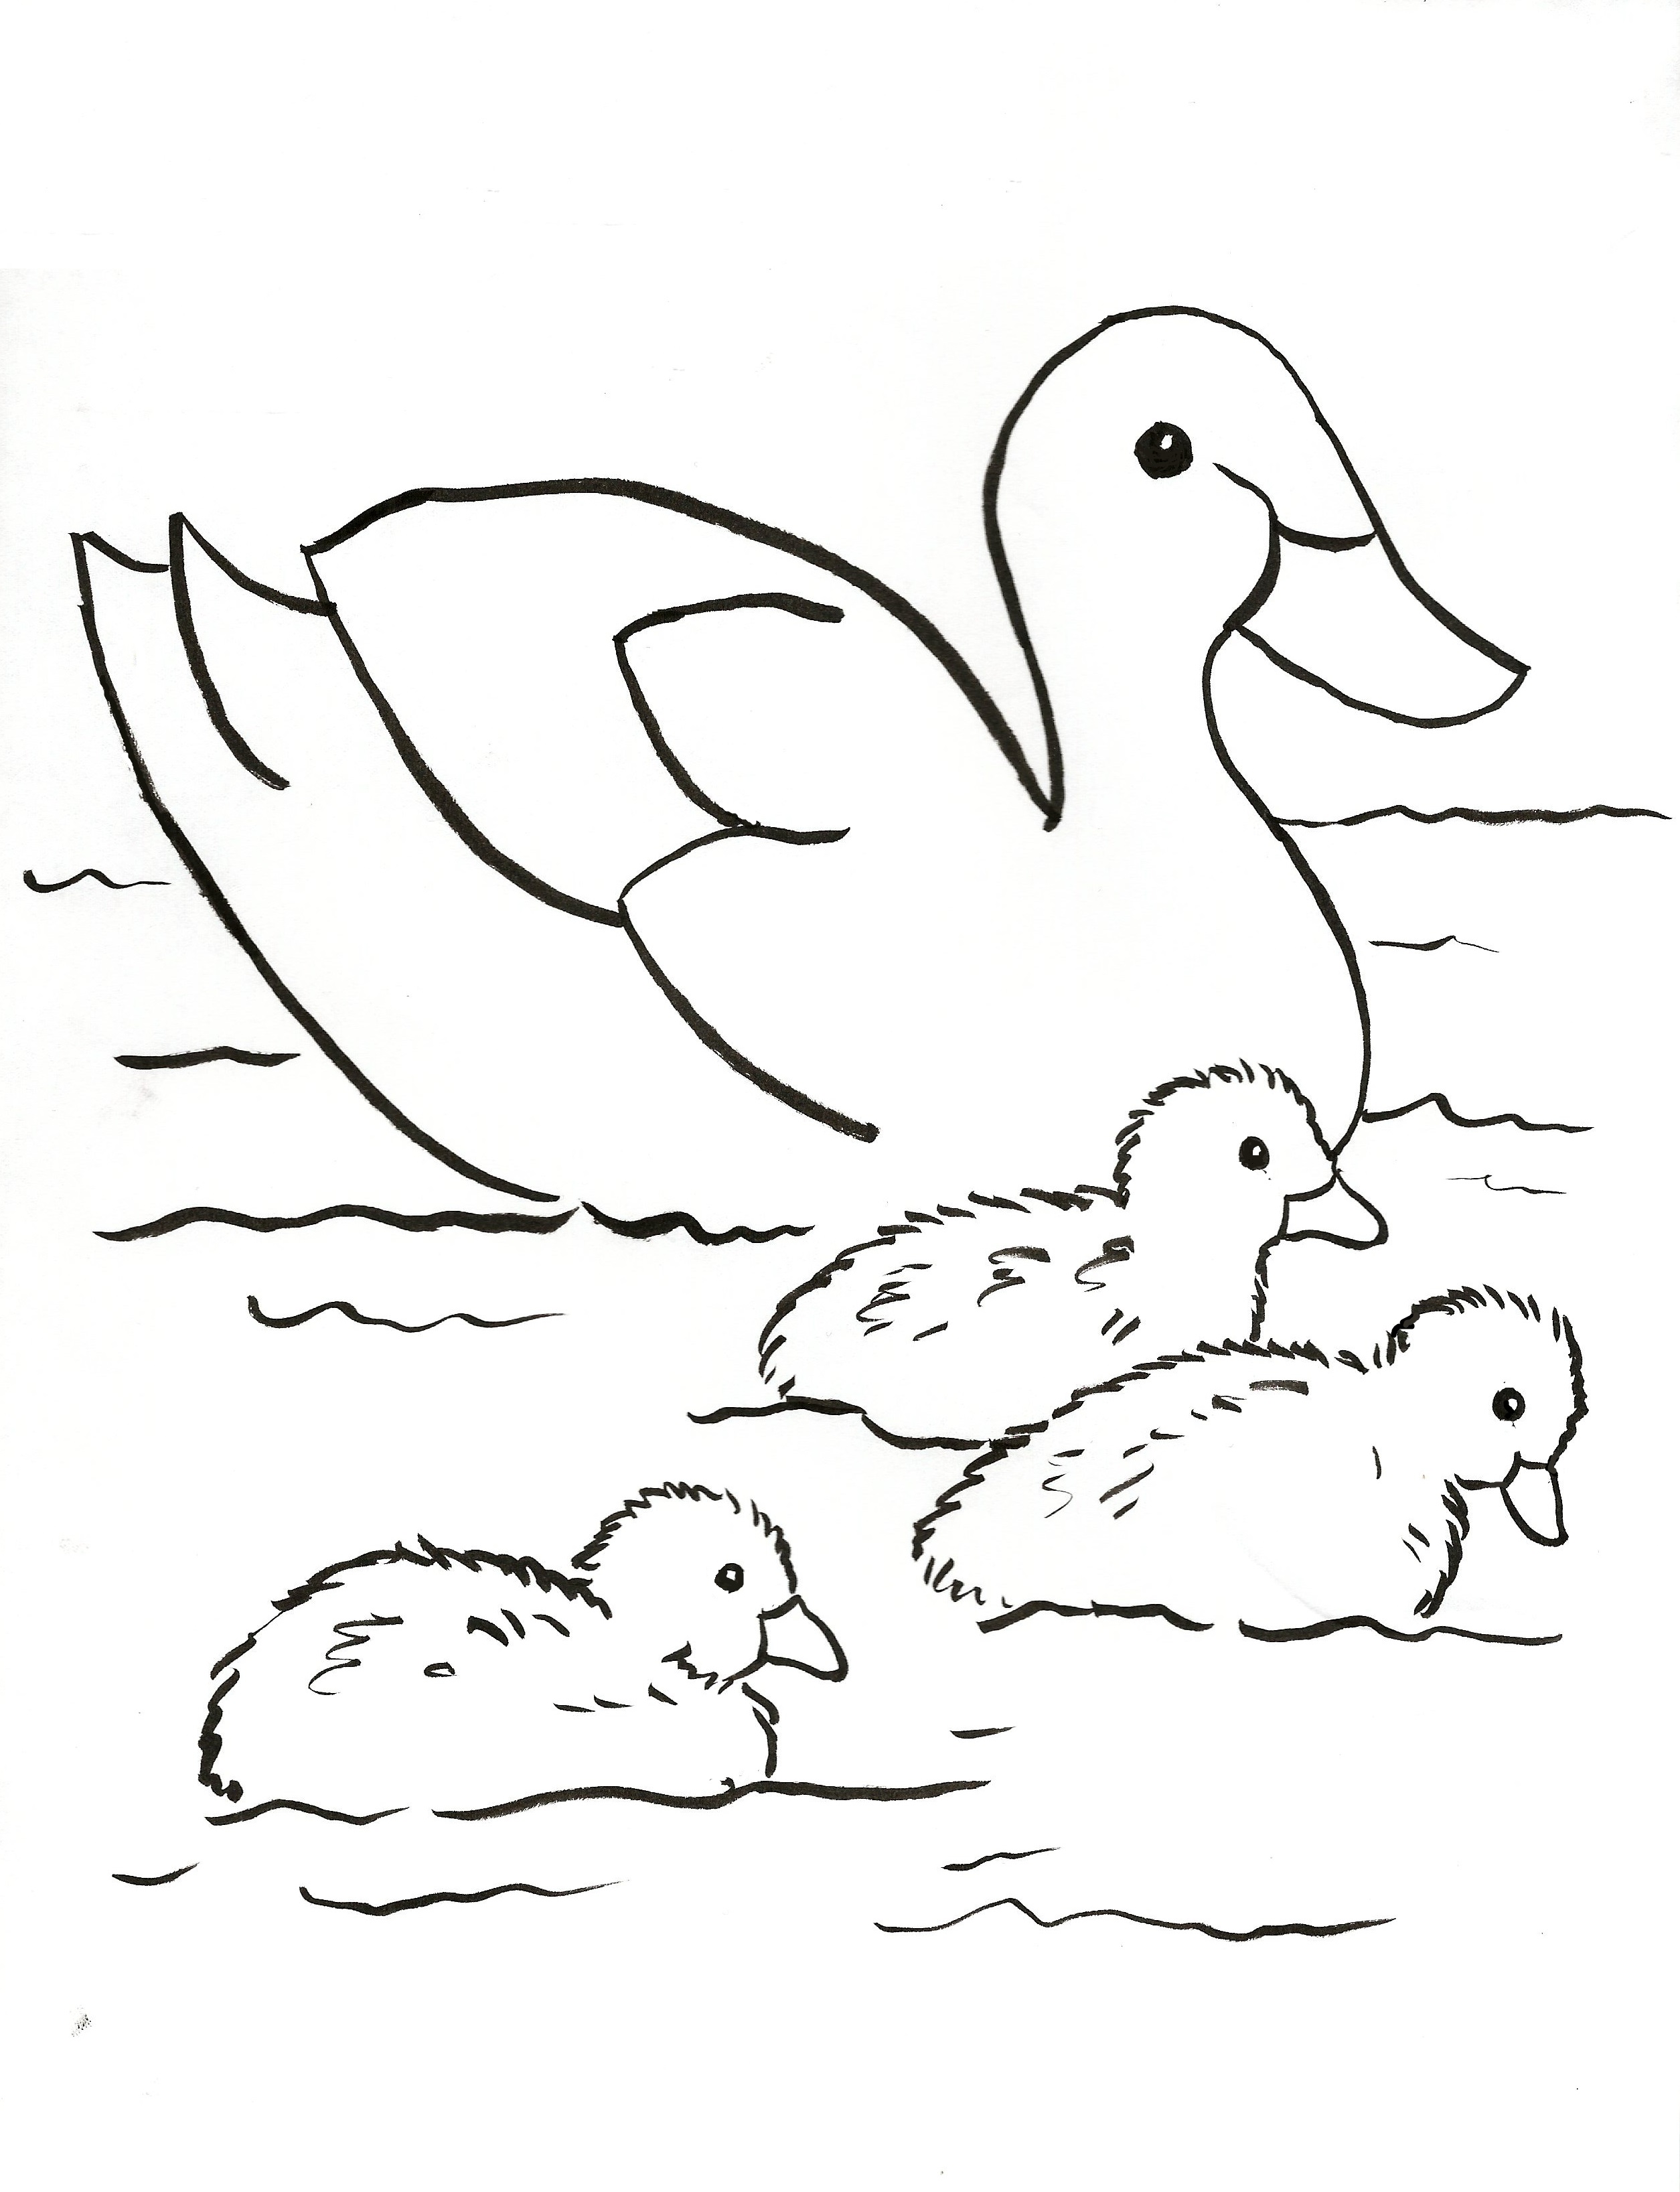 Duck Family Coloring Page - Art Starts